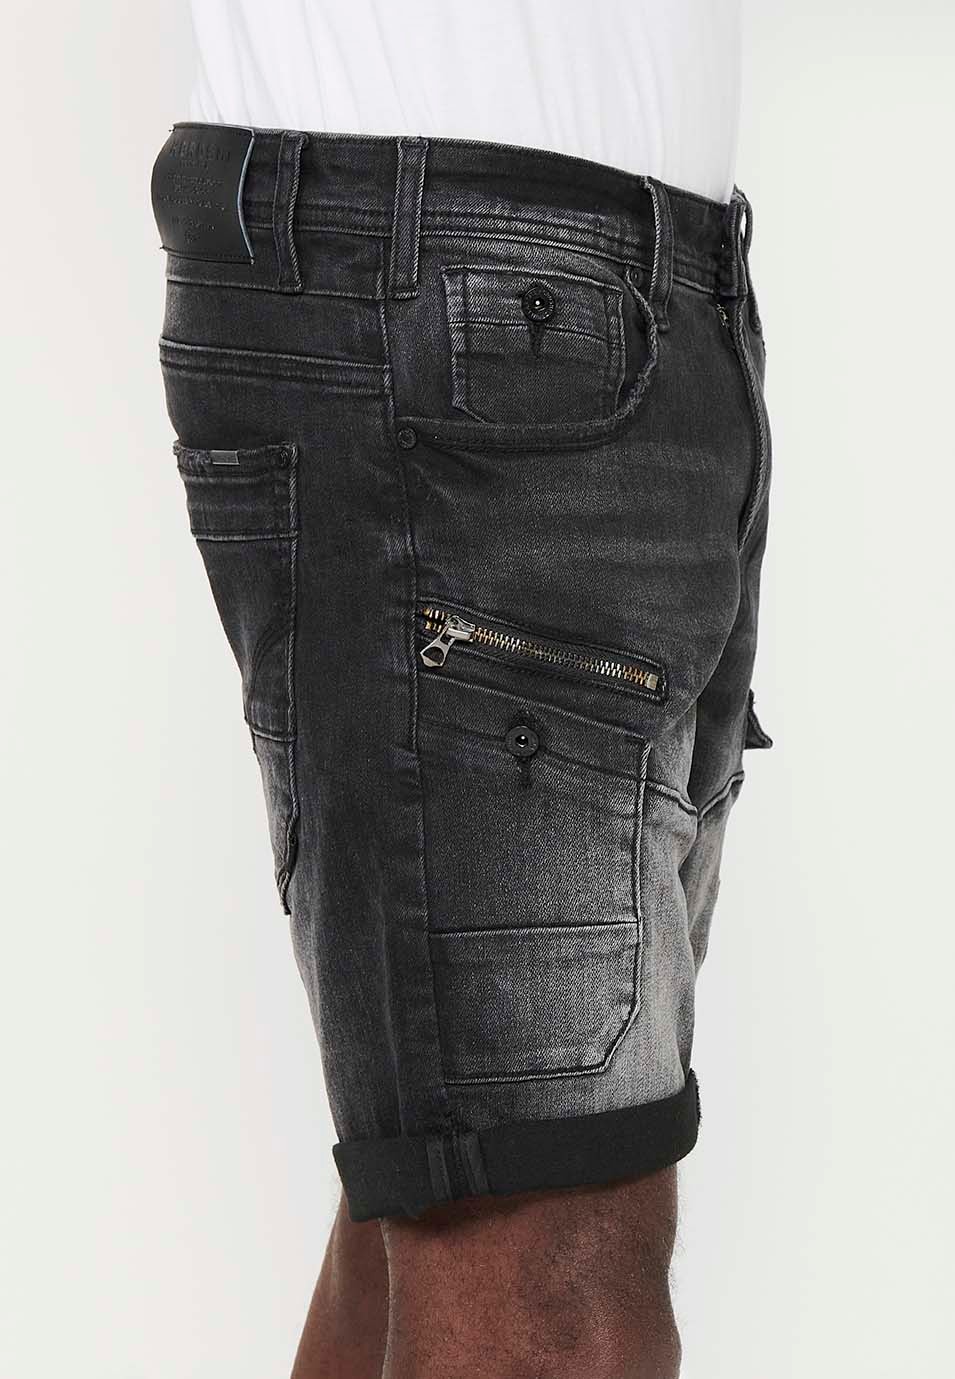 Shorts with Turn-up Finish and Front Closure with Zipper and Button with Five Pockets, One Pocket Pocket and Front Details in Black for Men 7